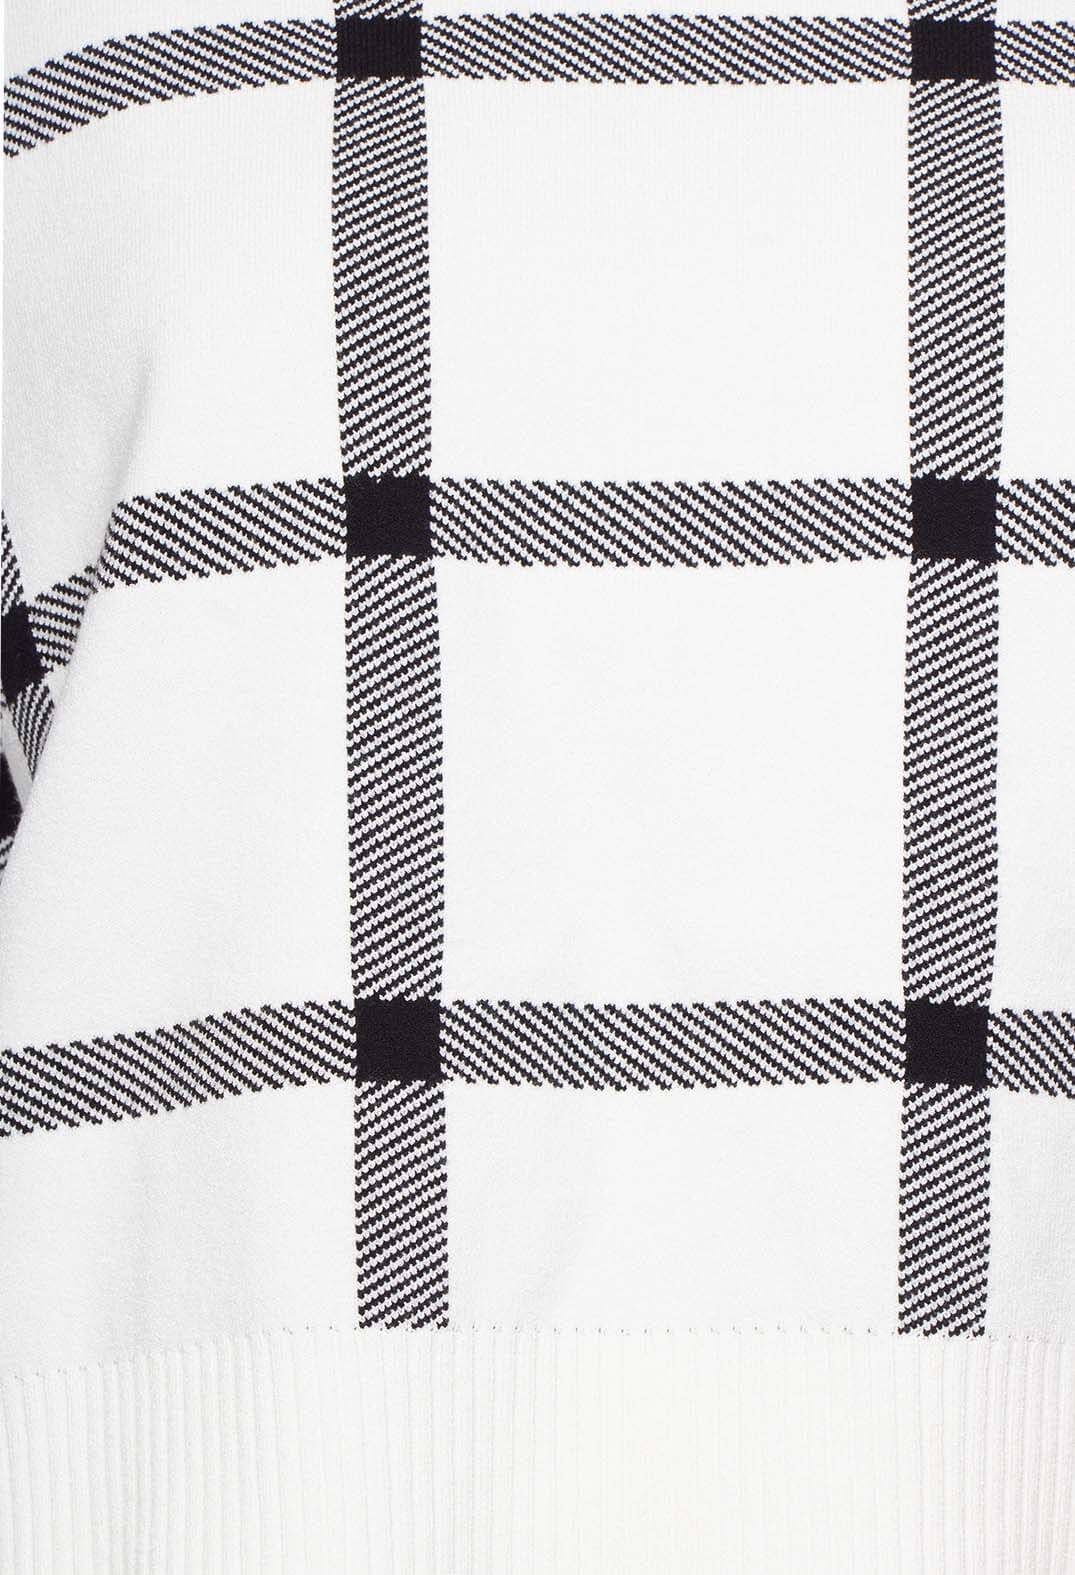 Long Sleeve Jumper with Check Design in White